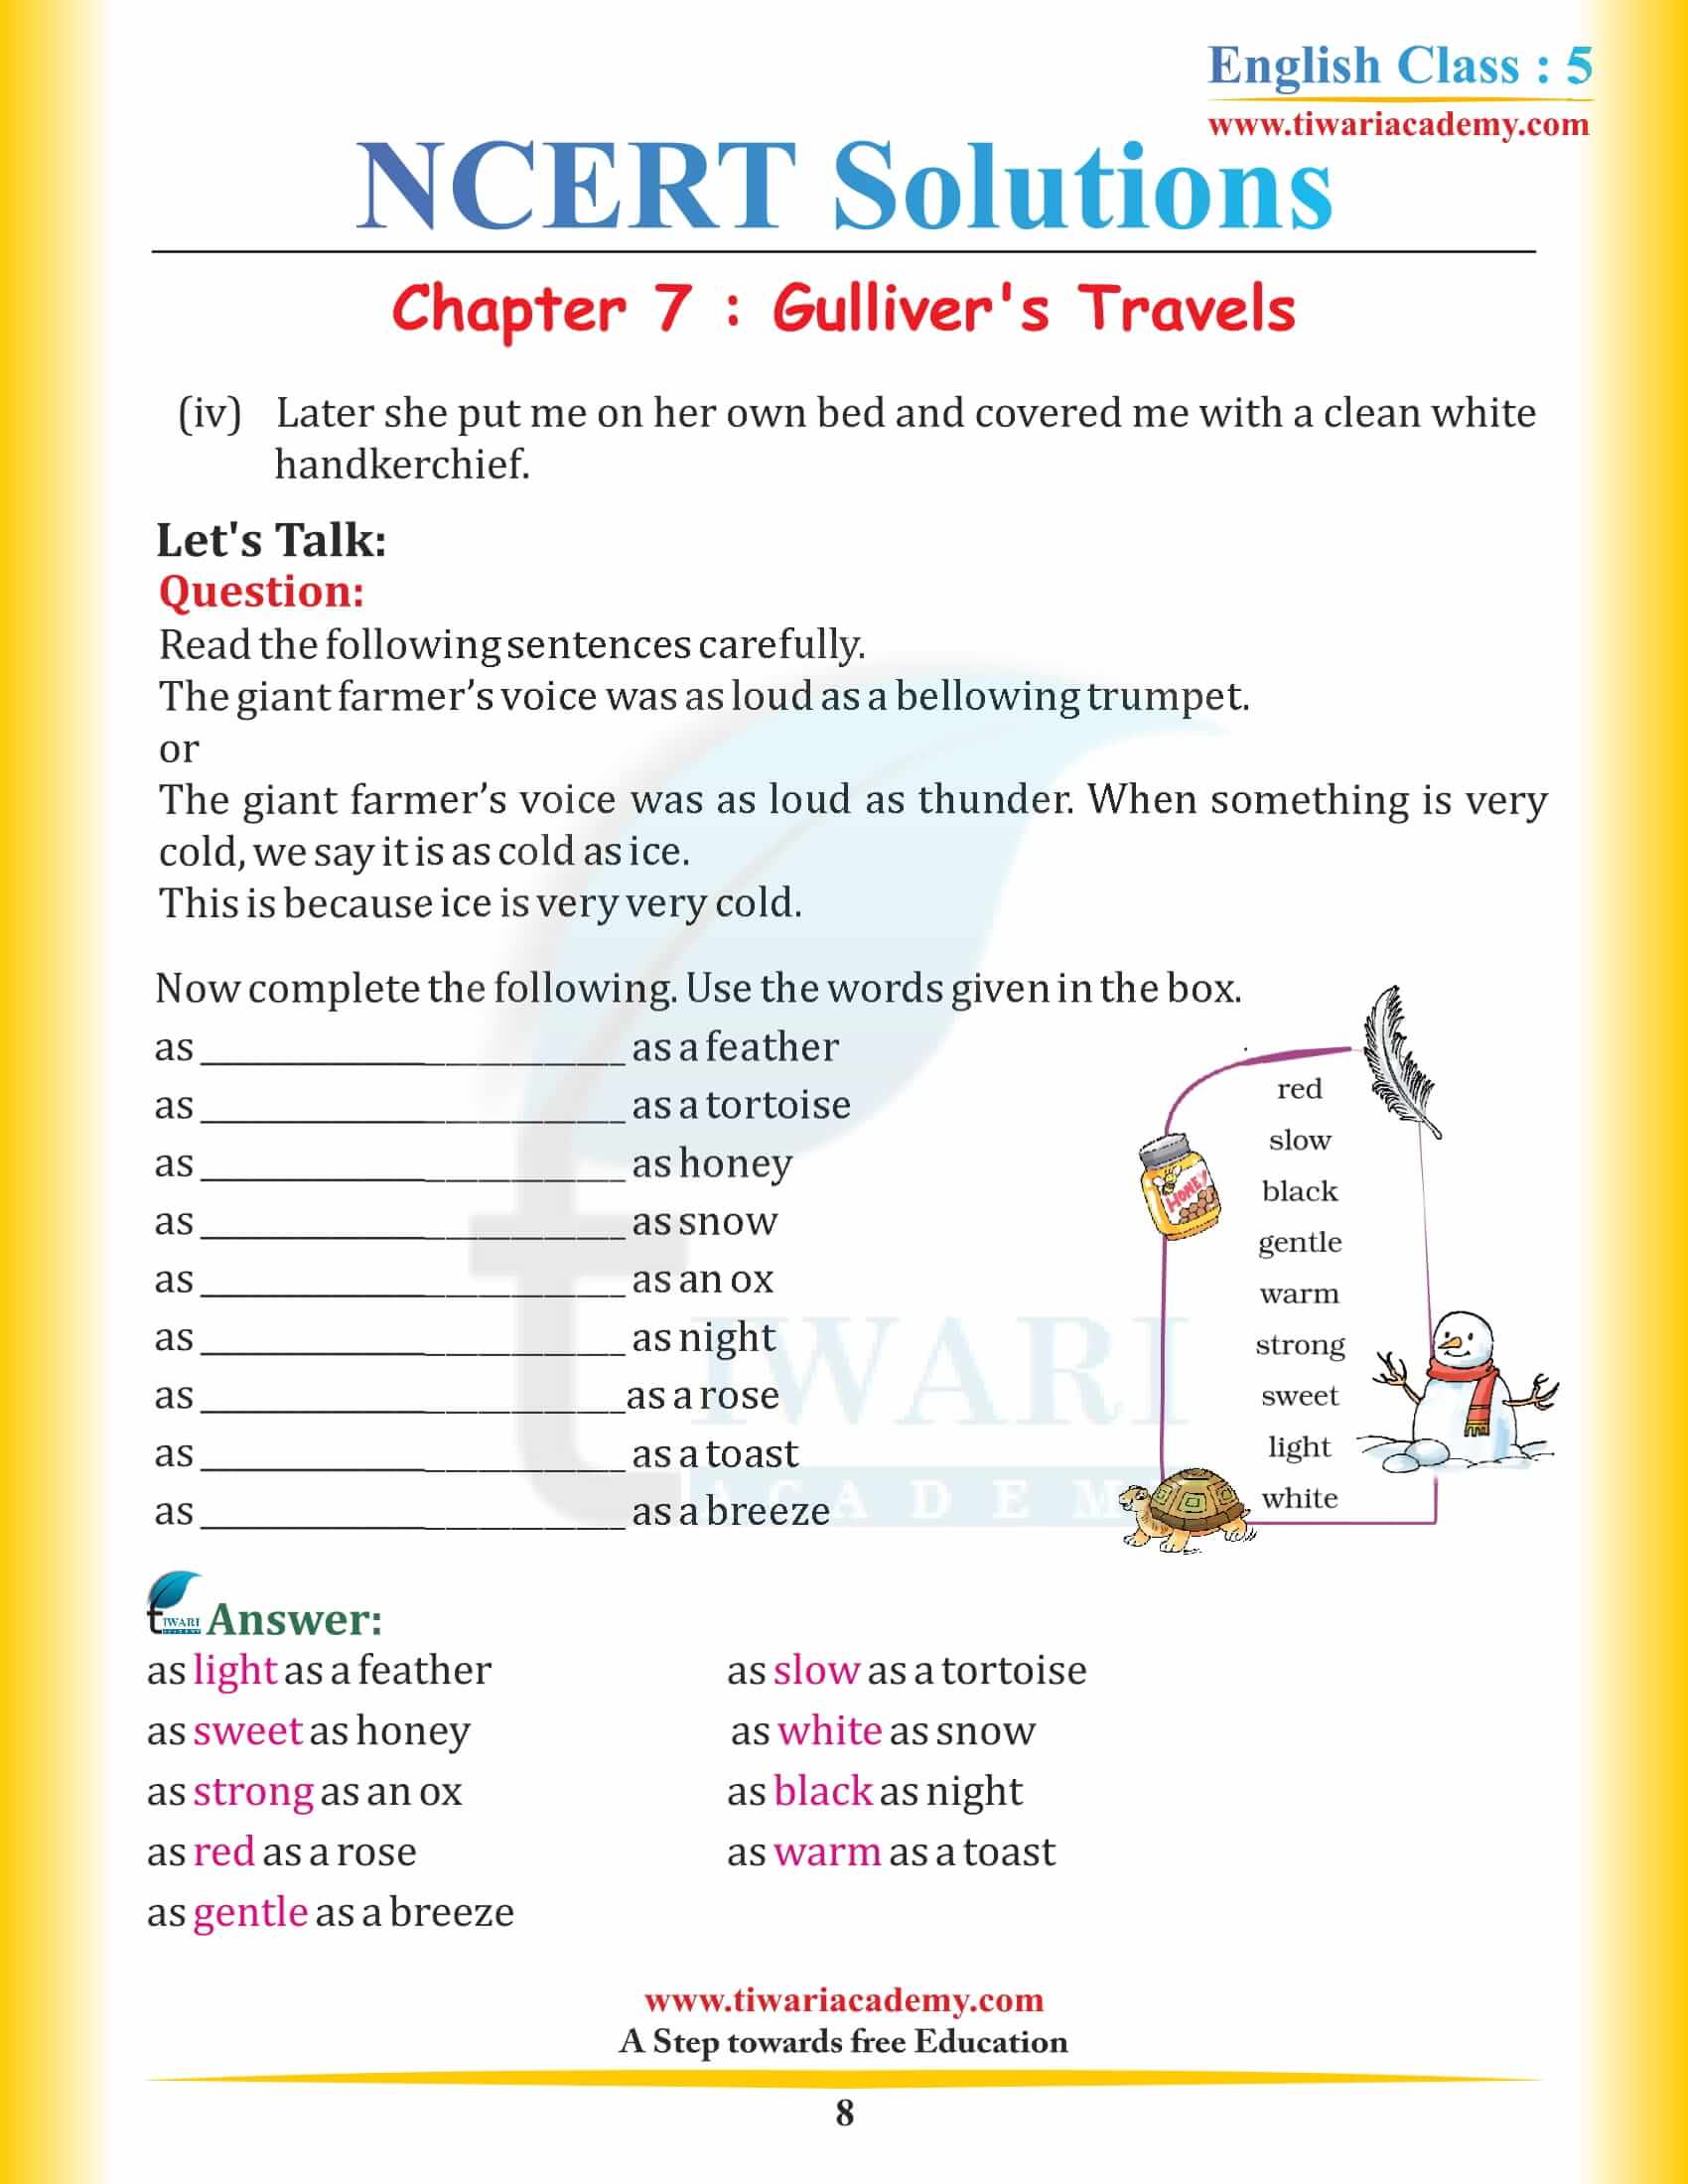 NCERT Solutions for Class 5 English Chapter 7 Gulliver’s Travels in Hindi